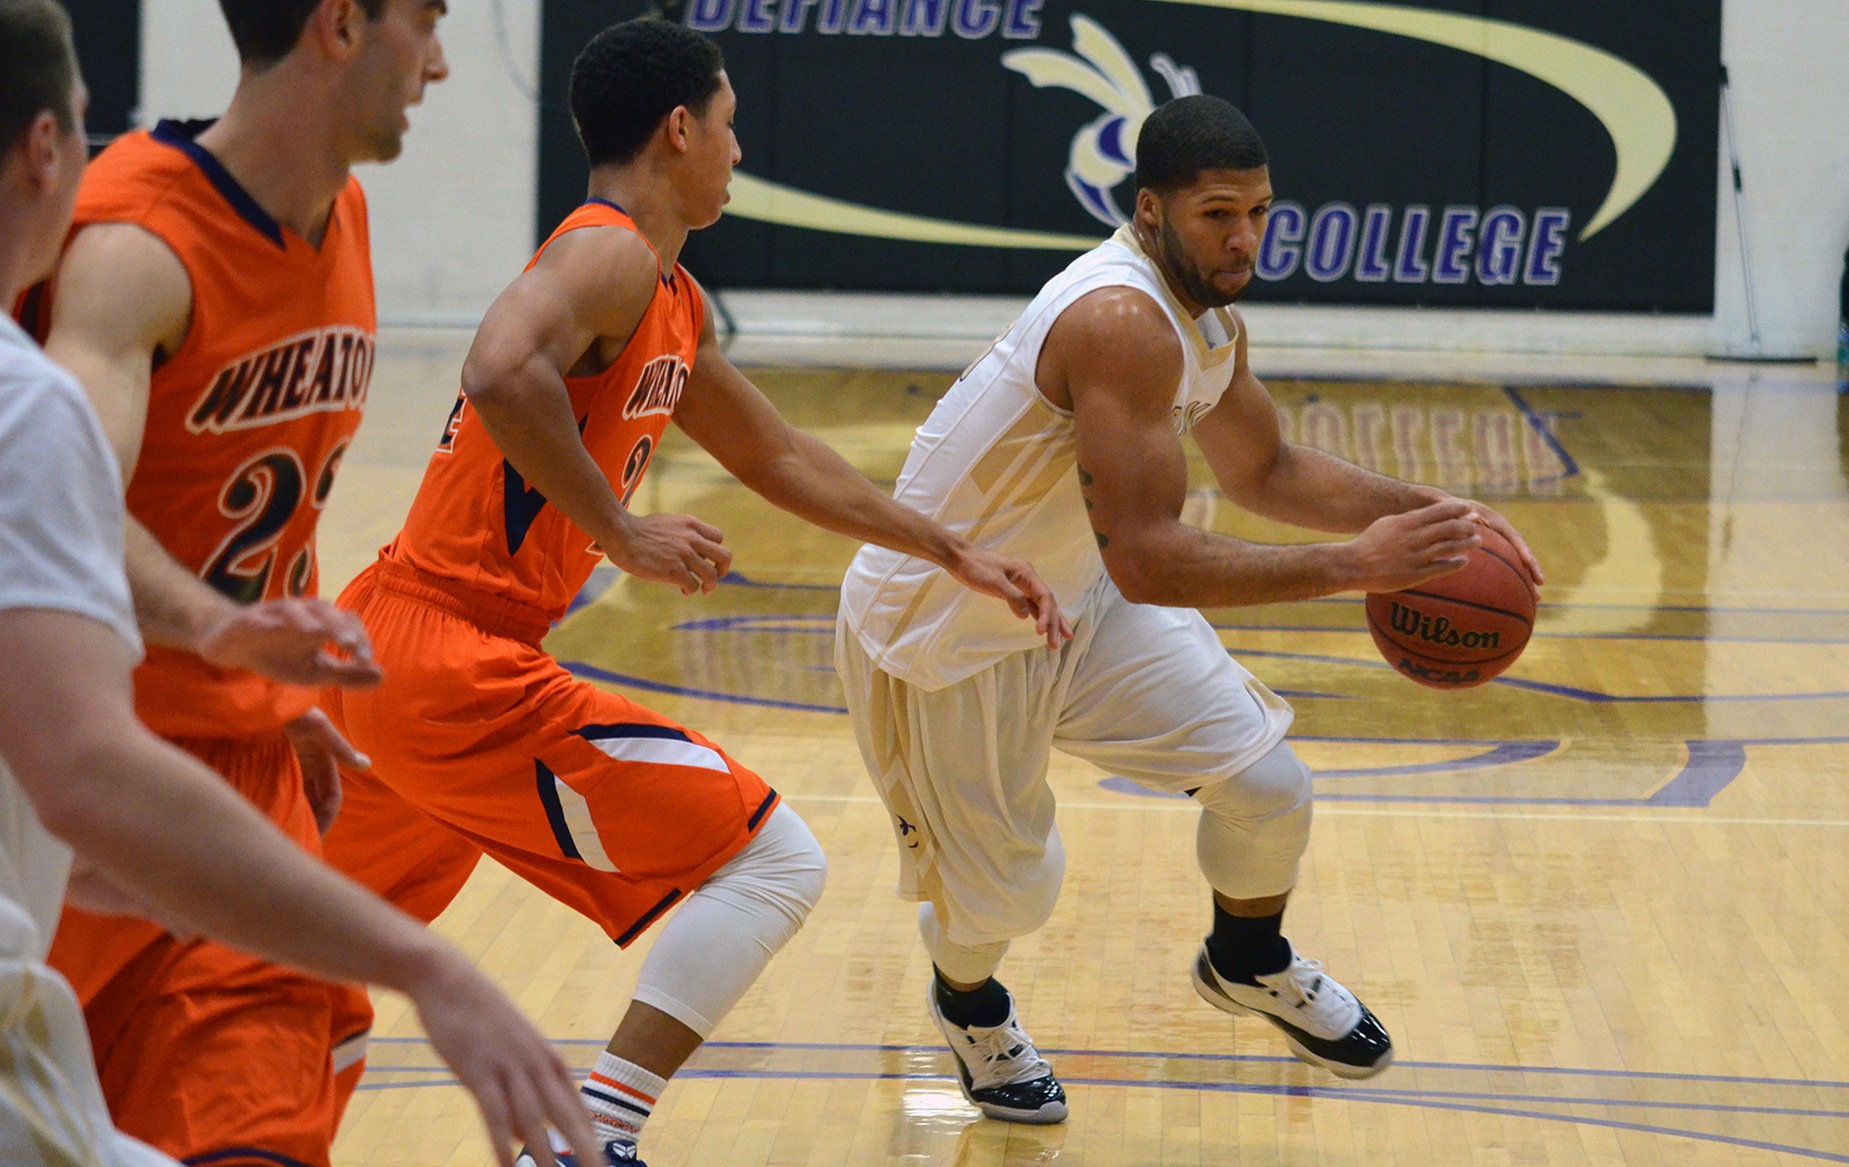 Yellow Jackets Drop Close Game Against Pioneers